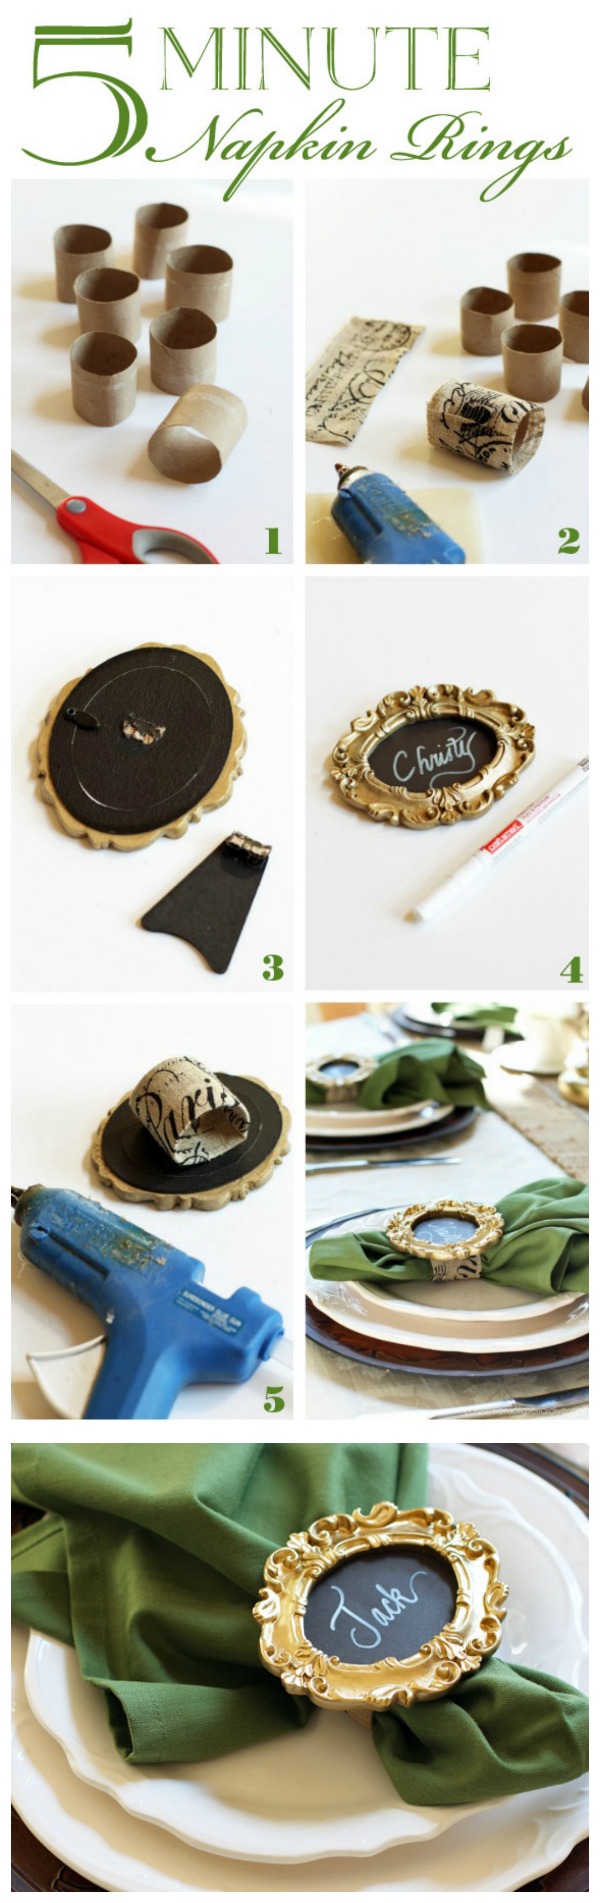 Five-minute Napkin RIngs using Mini Photo Frames from confessionsofaserialdiyer.com